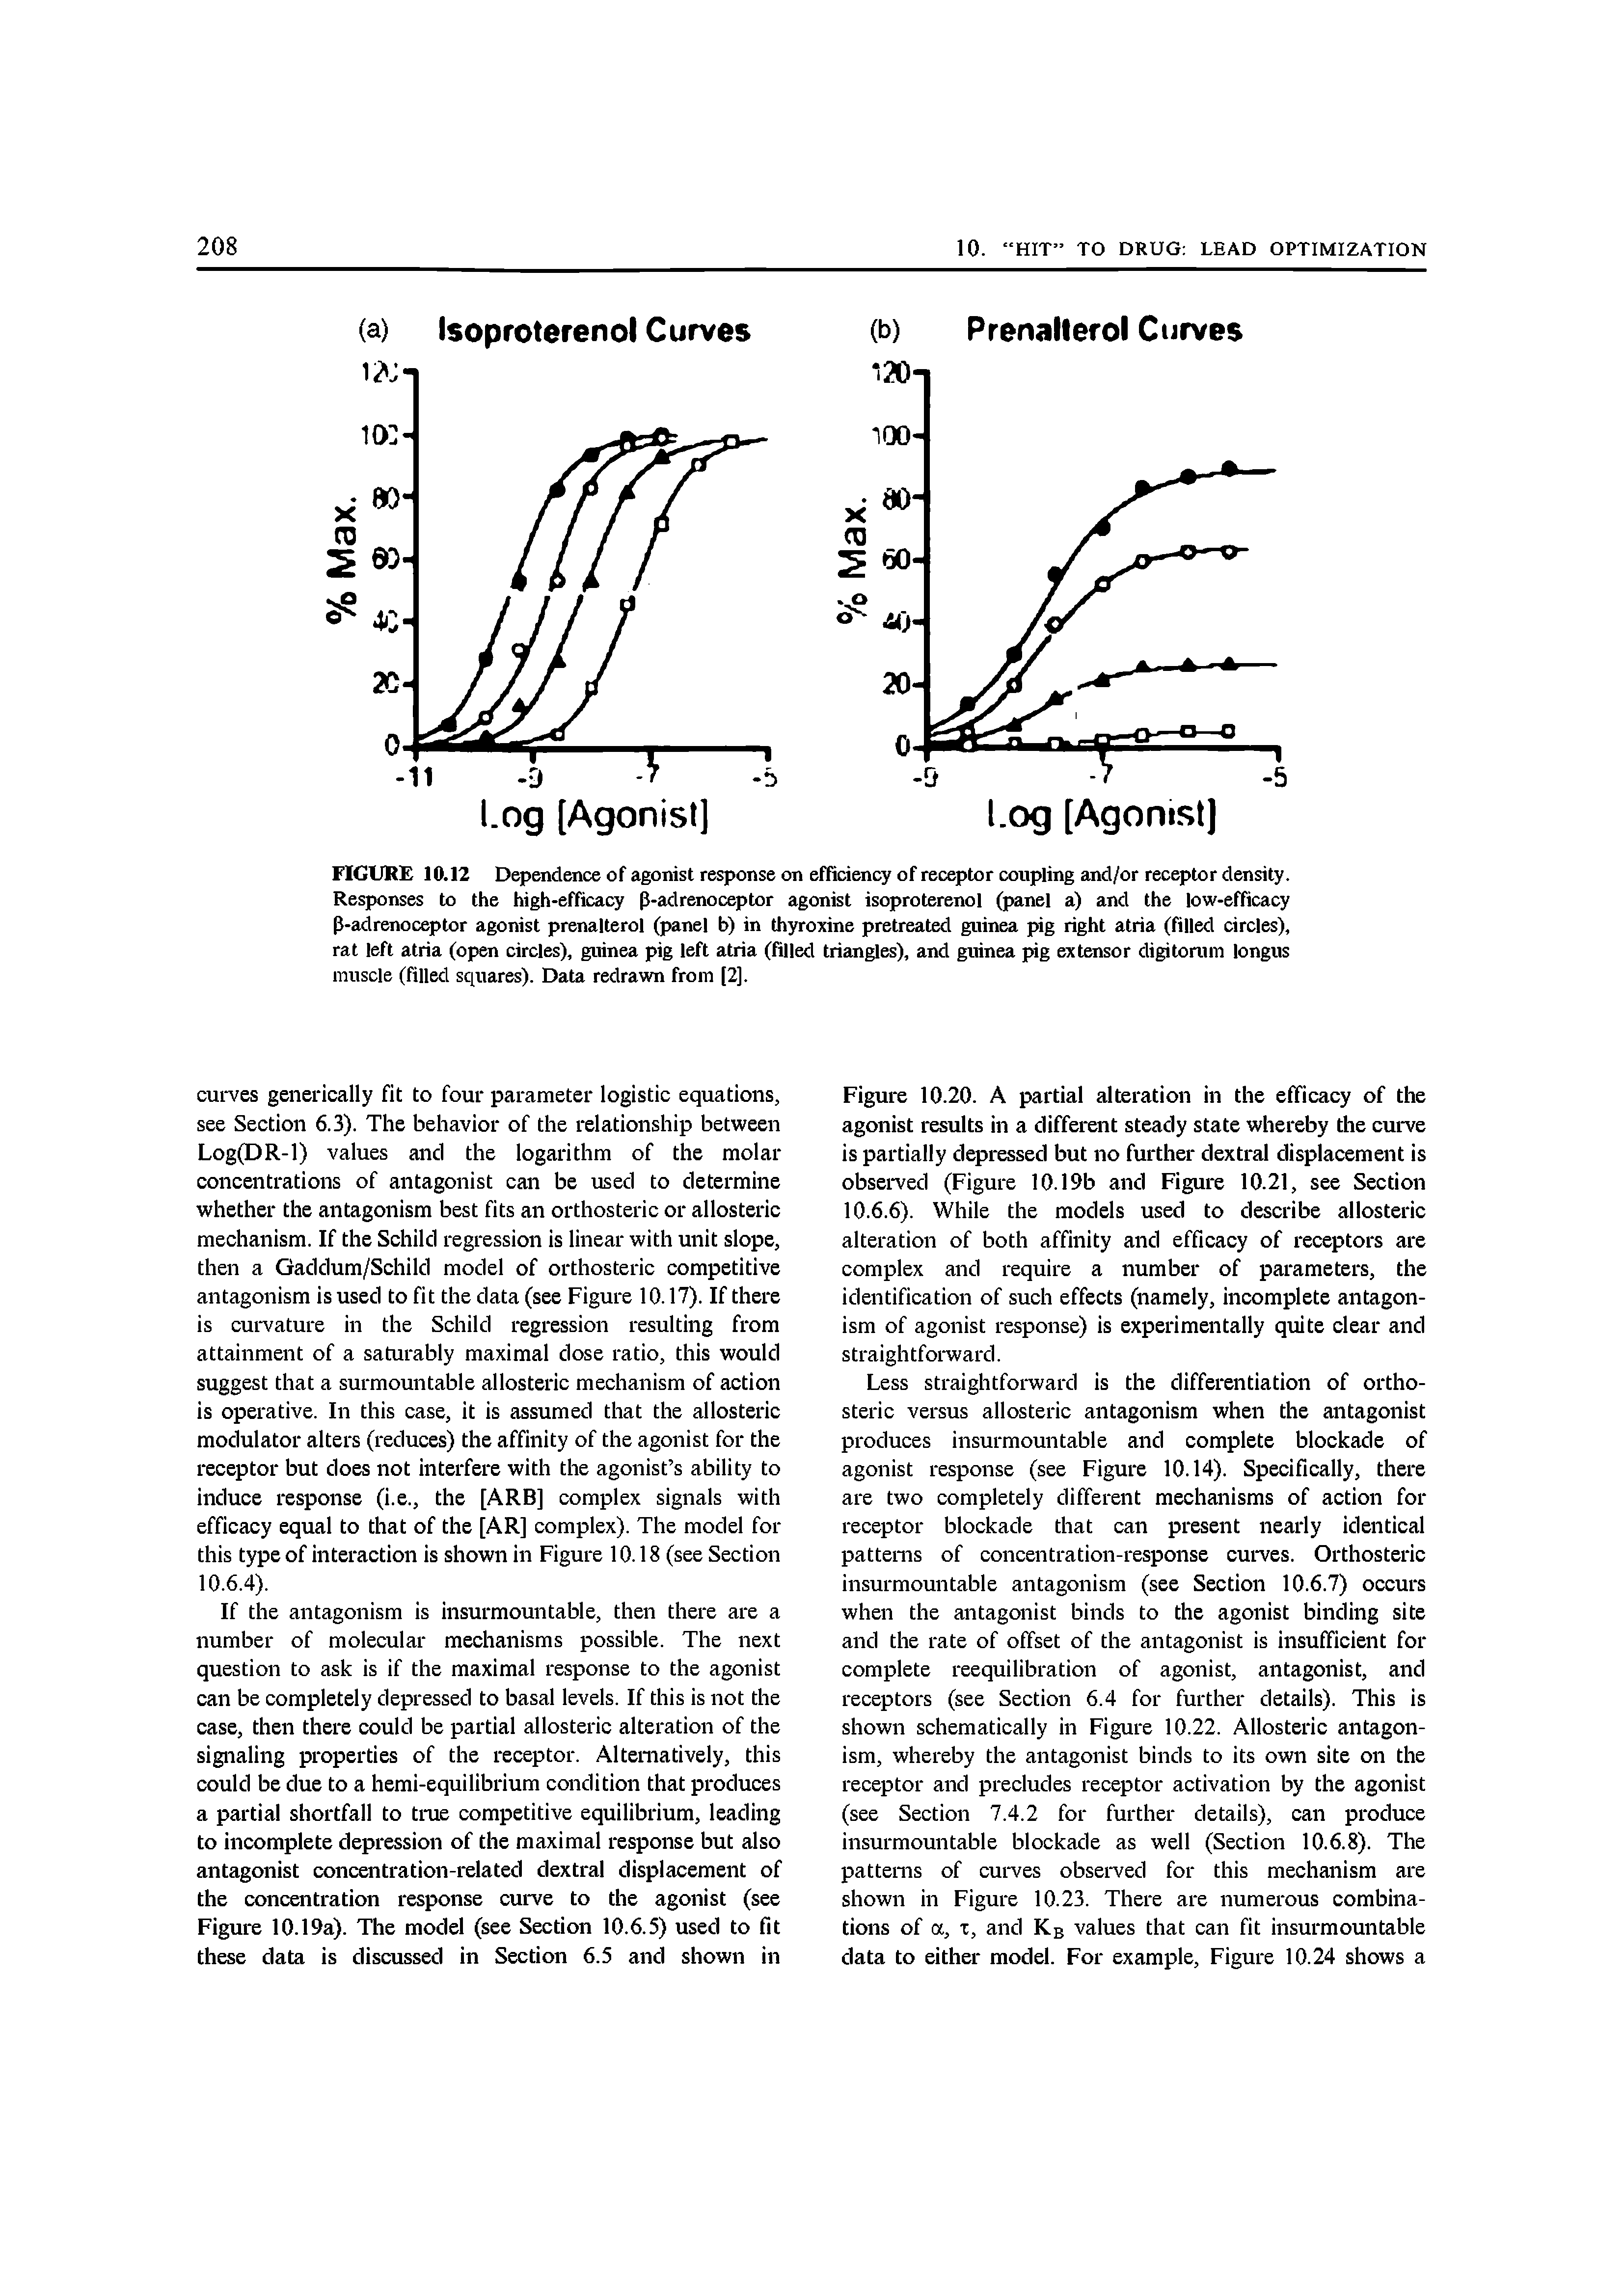 Figure 10.20. A partial alteration in the efficacy of the agonist results in a different steady state whereby the curve is partially depressed but no further dextral displacement is observed (Figure 10.19b and Figure 10.21, see Section 10.6.6). While the models used to describe allosteric alteration of both affinity and efficacy of receptors are complex and require a number of parameters, the identification of such effects (namely, incomplete antagonism of agonist response) is experimentally quite clear and straightforward.